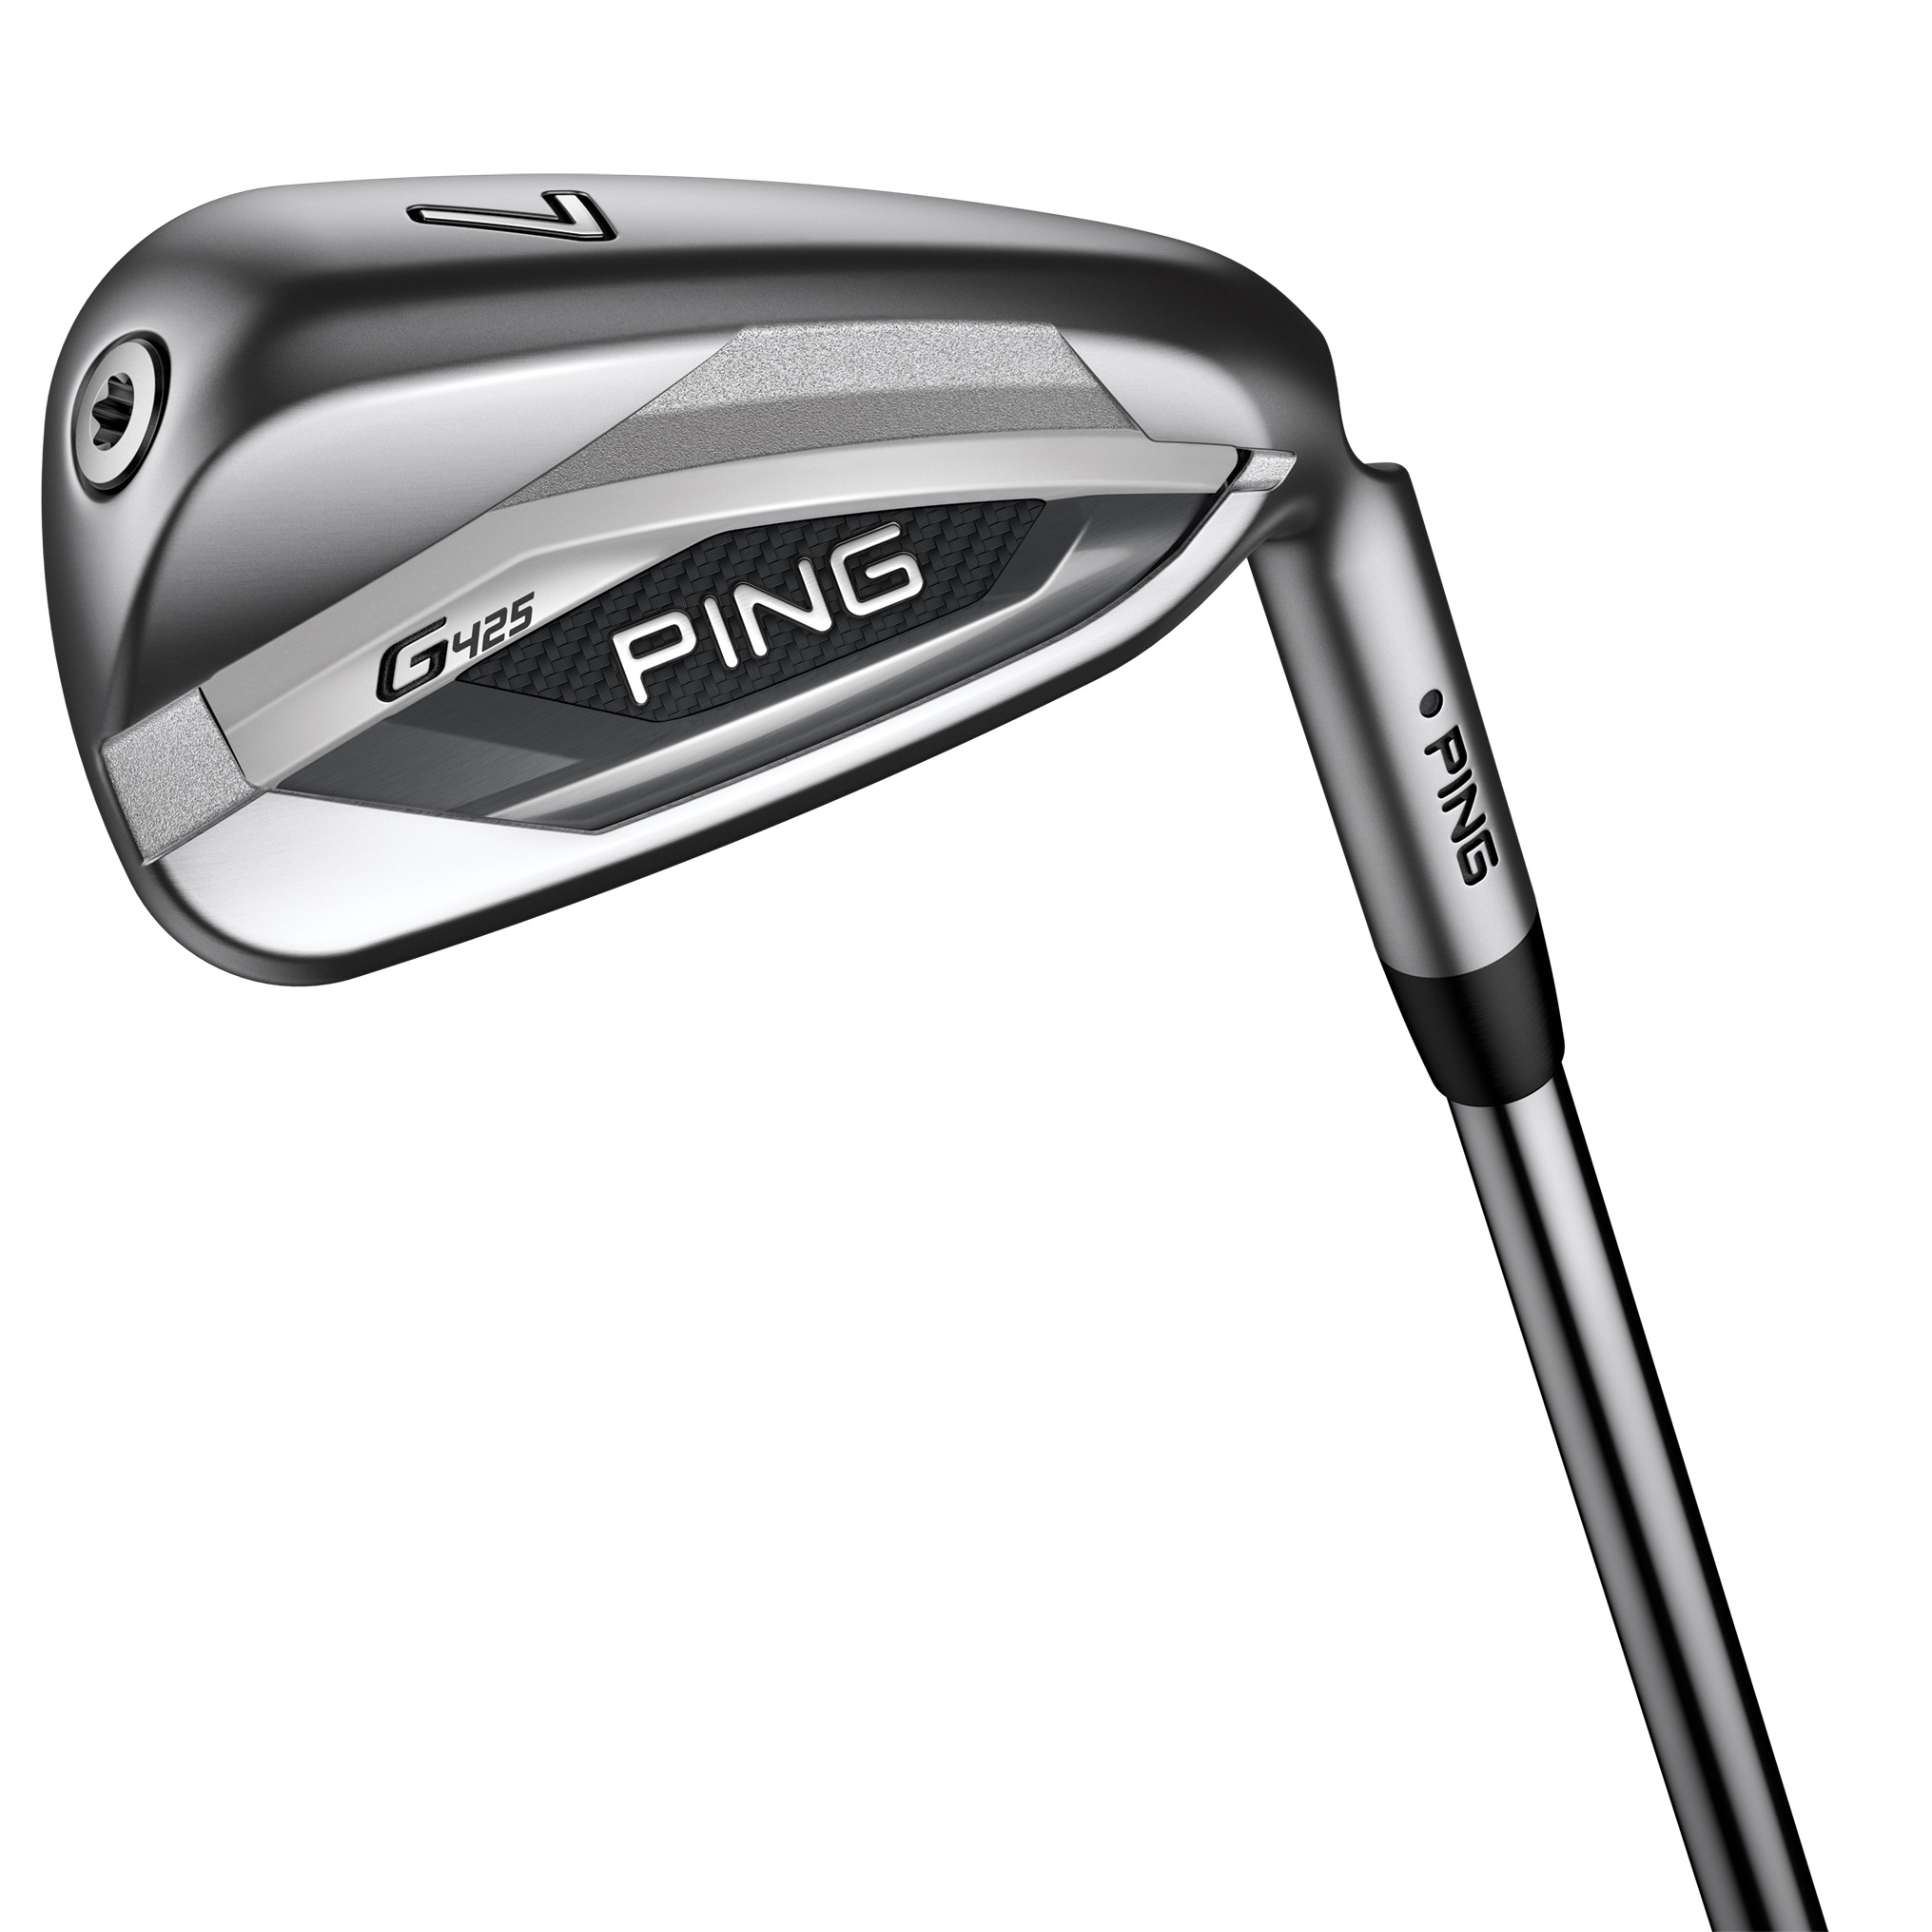 Ping G425 irons build on forgiveness heritage with an added